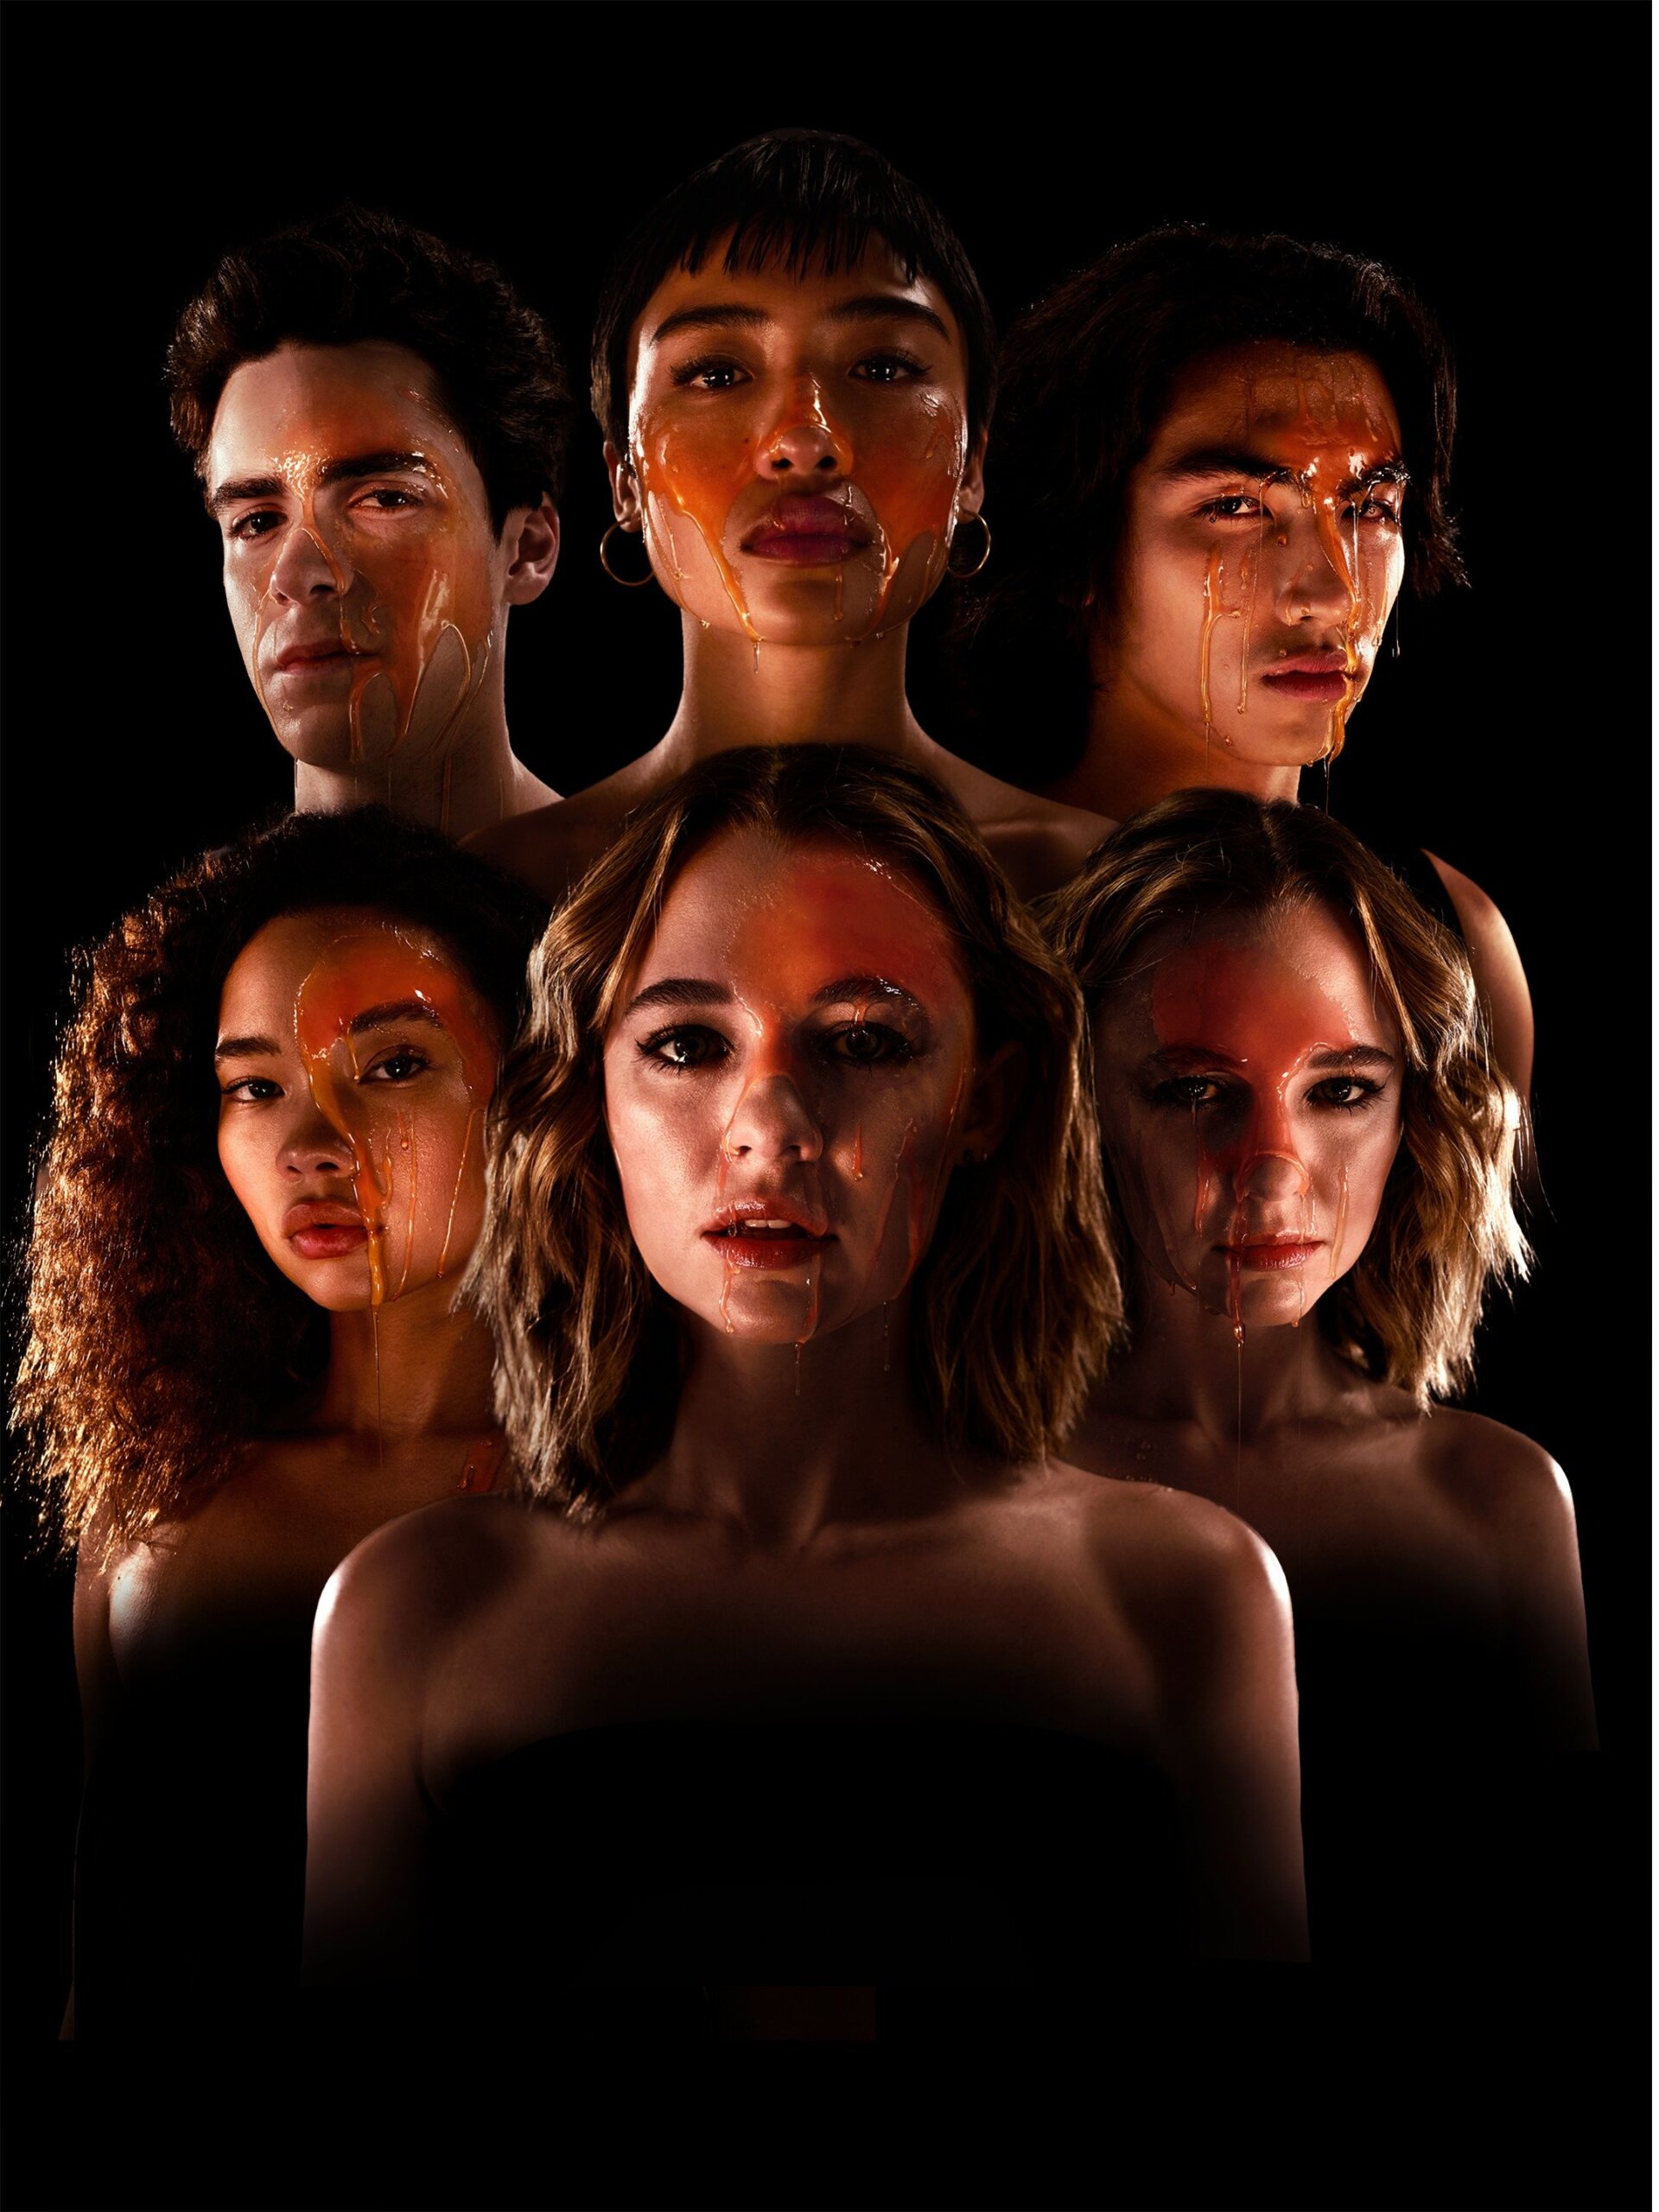 Six teenagers, four girls and two guys are looking directly at the camera. There is blood on their faces. The background is black.